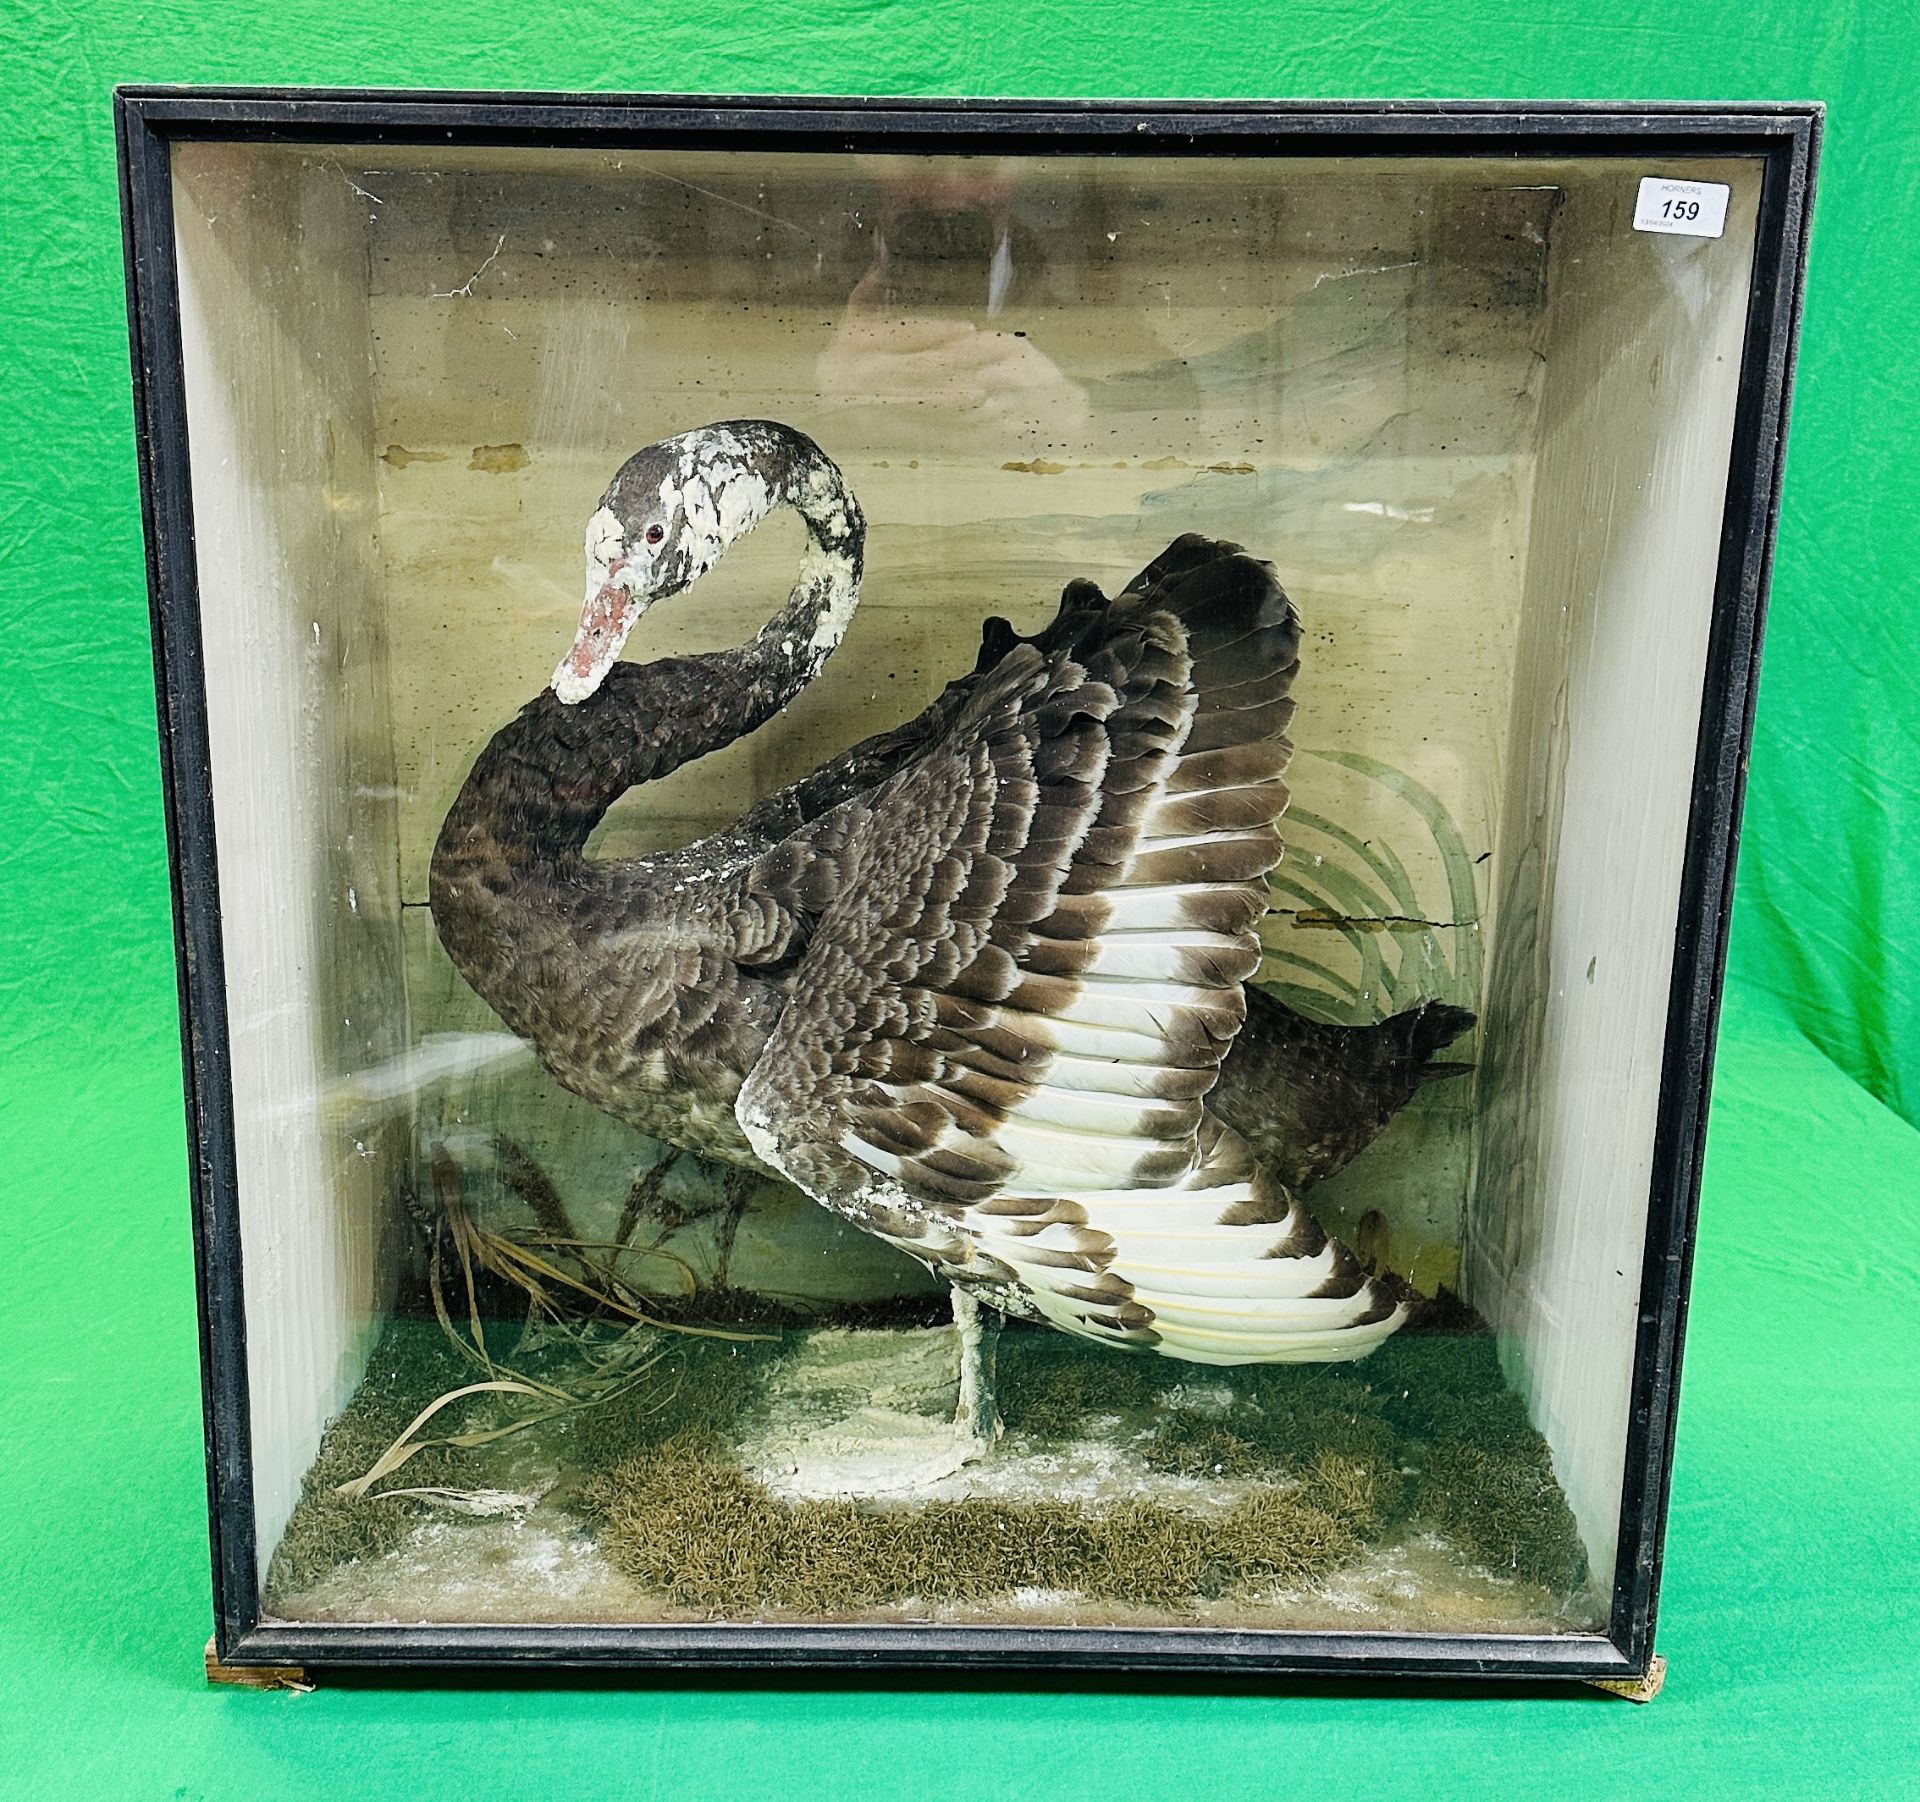 A VICTORIAN CASED TAXIDERMY STUDY OF A BLACK SWAN, IN A NATURALISTIC SETTING - W 72.